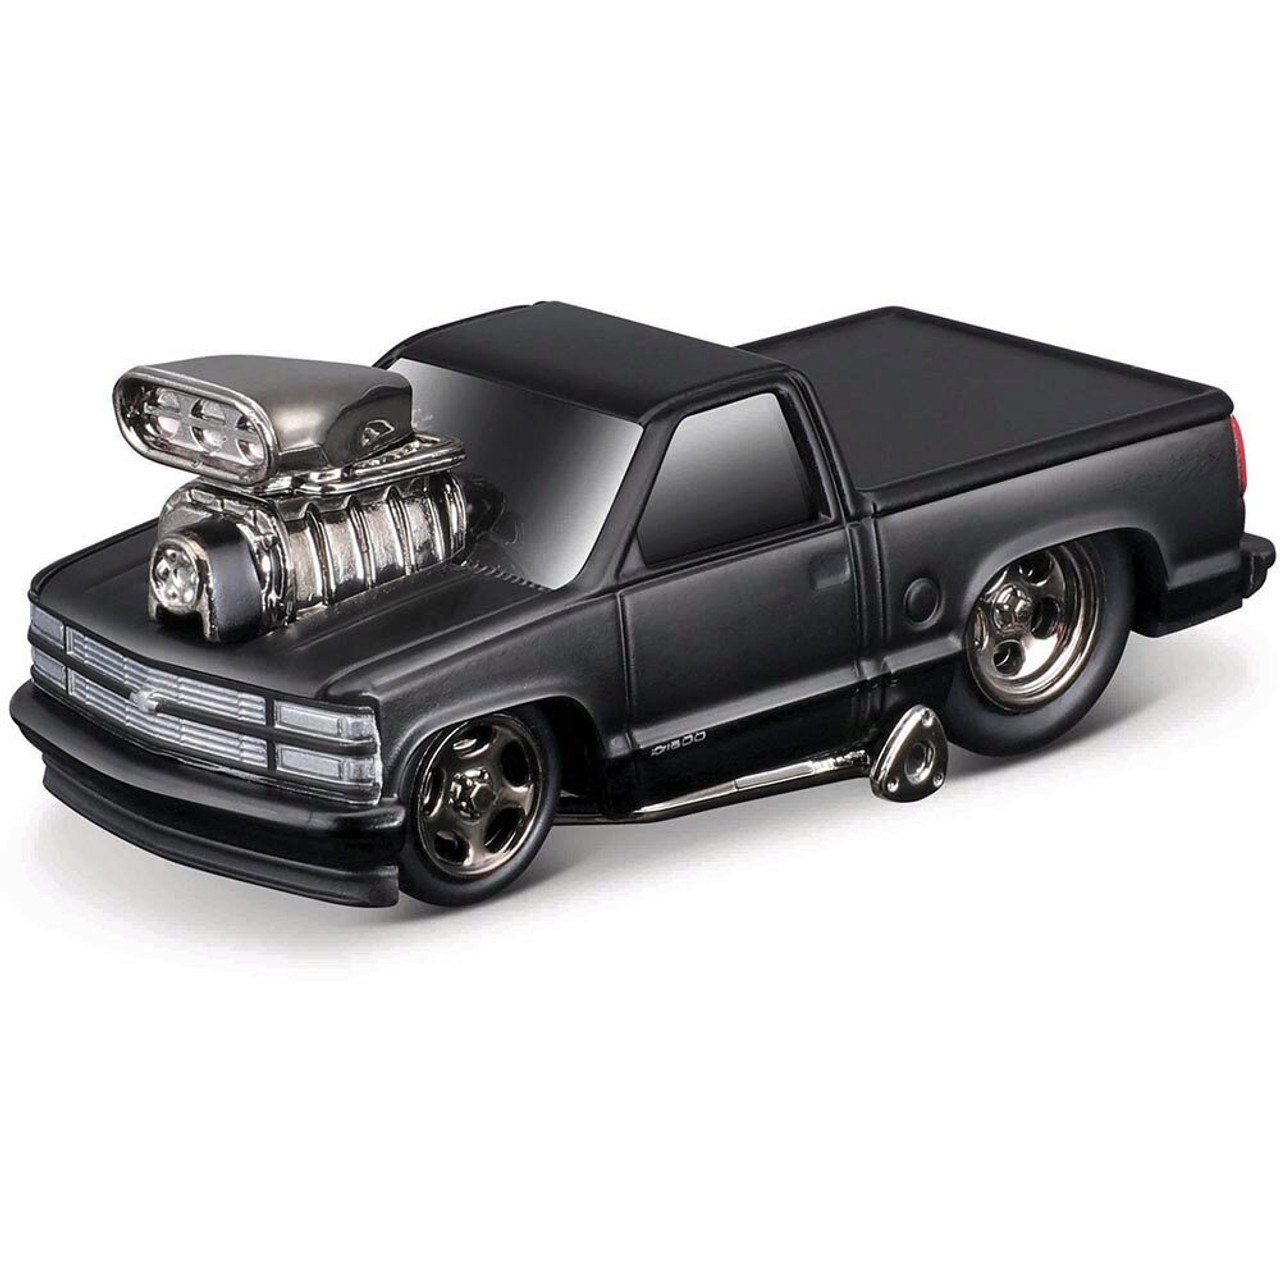 1993 Chevrolet 454 SS Muscle Machine - Blackout 1:64 Scale Diecast Replica  Model